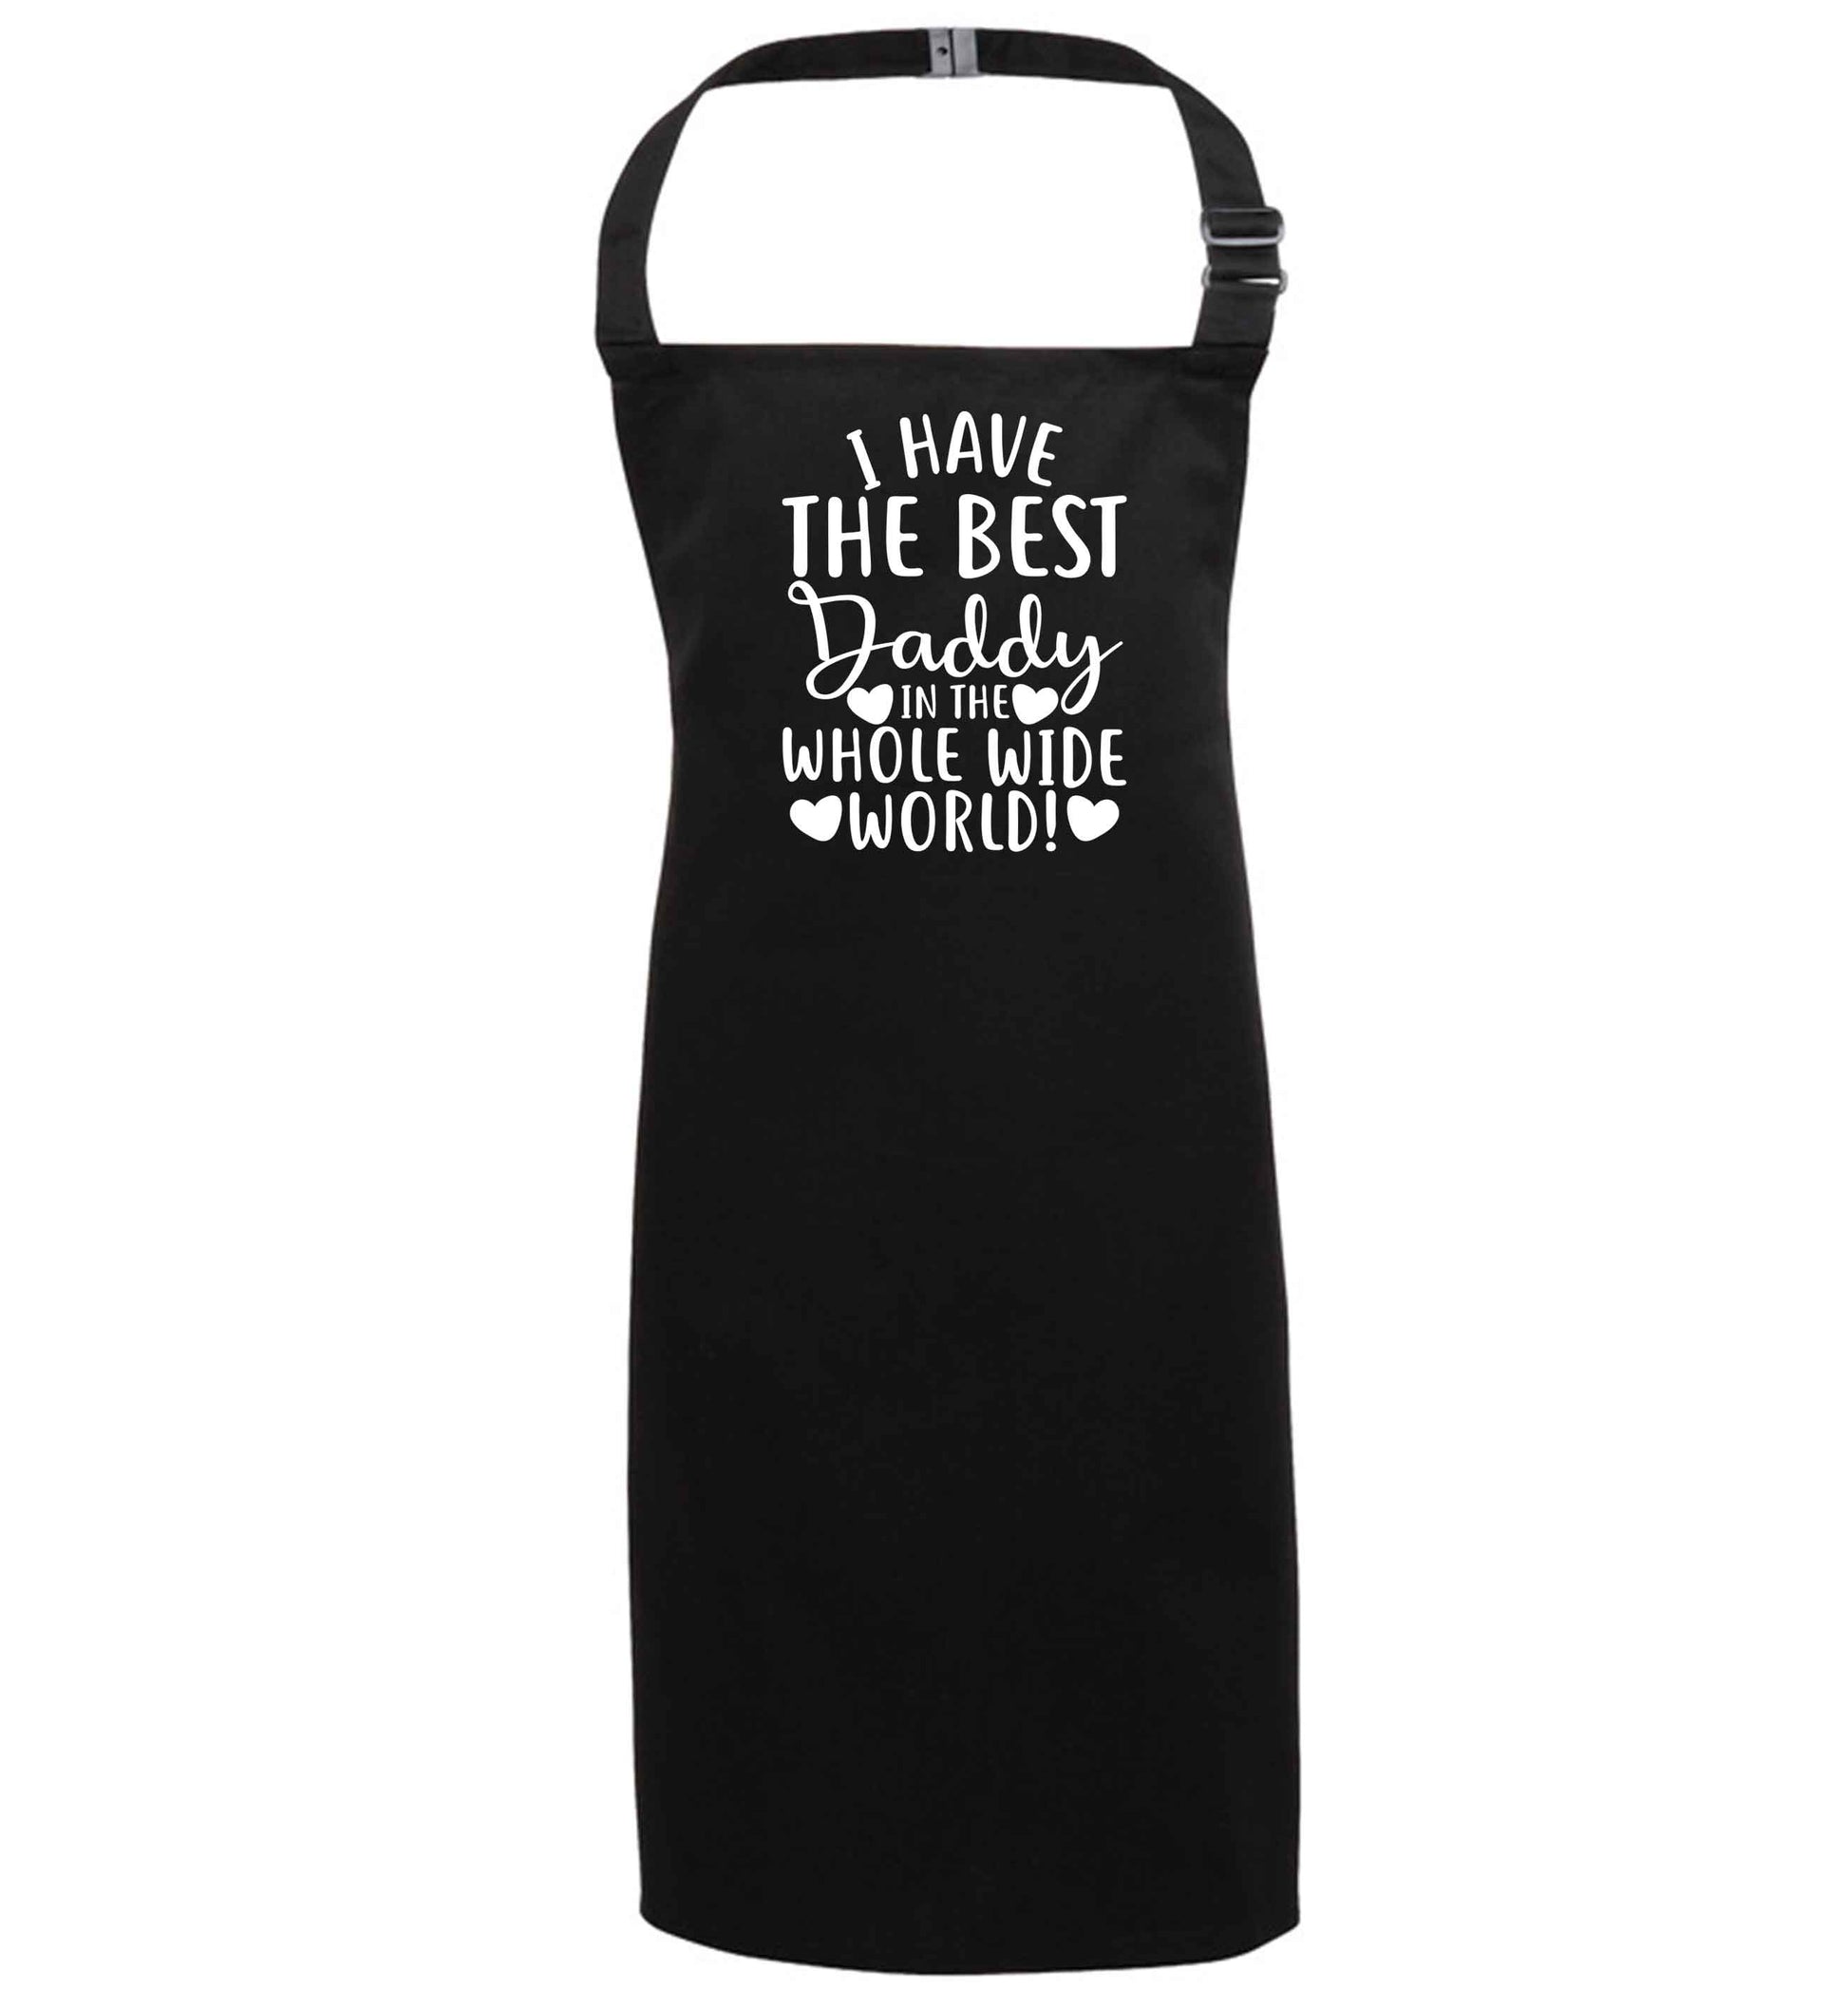 I have the best daddy in the whole wide world black apron 7-10 years